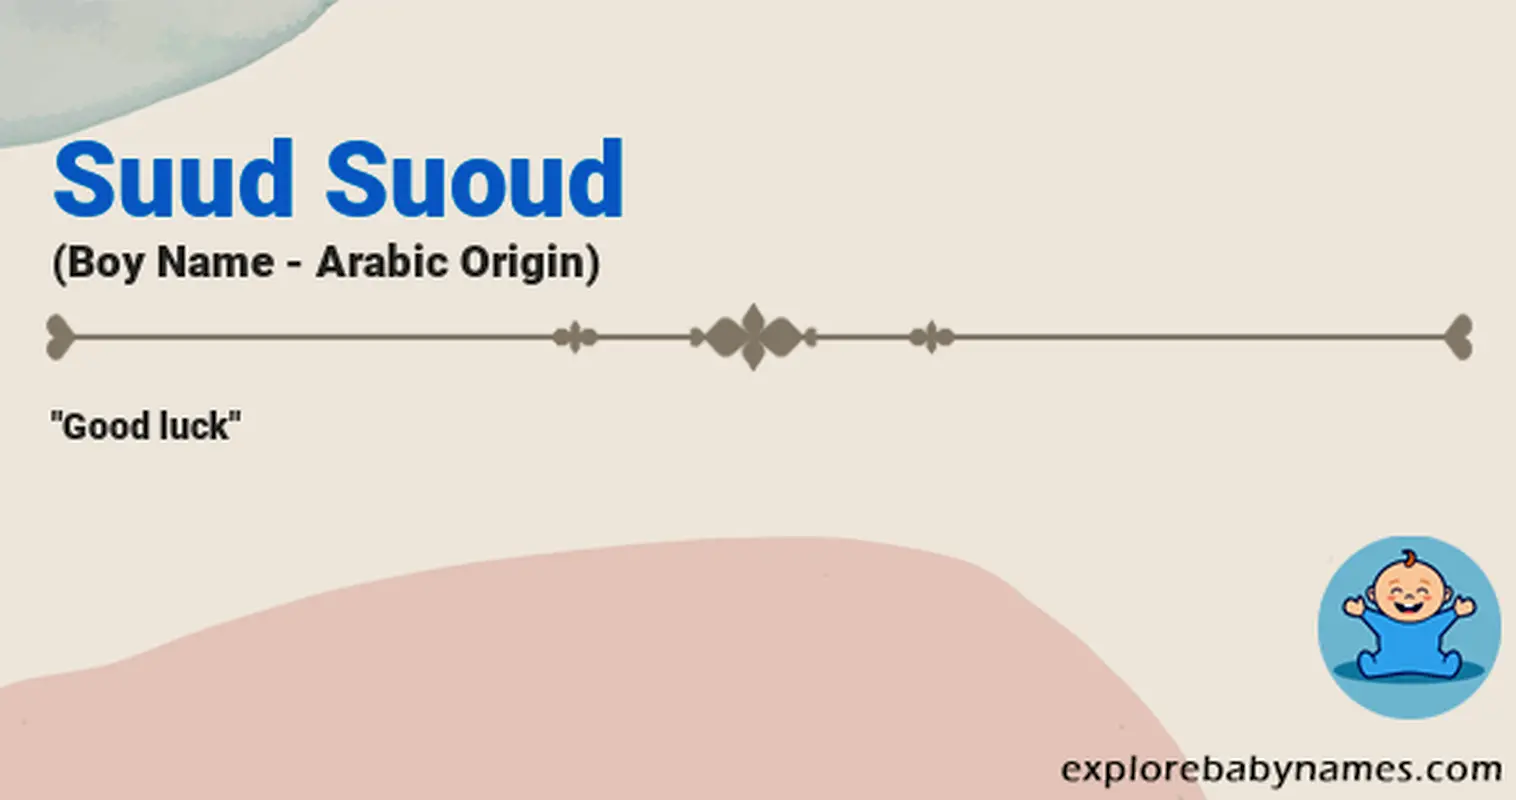 Meaning of Suud Suoud